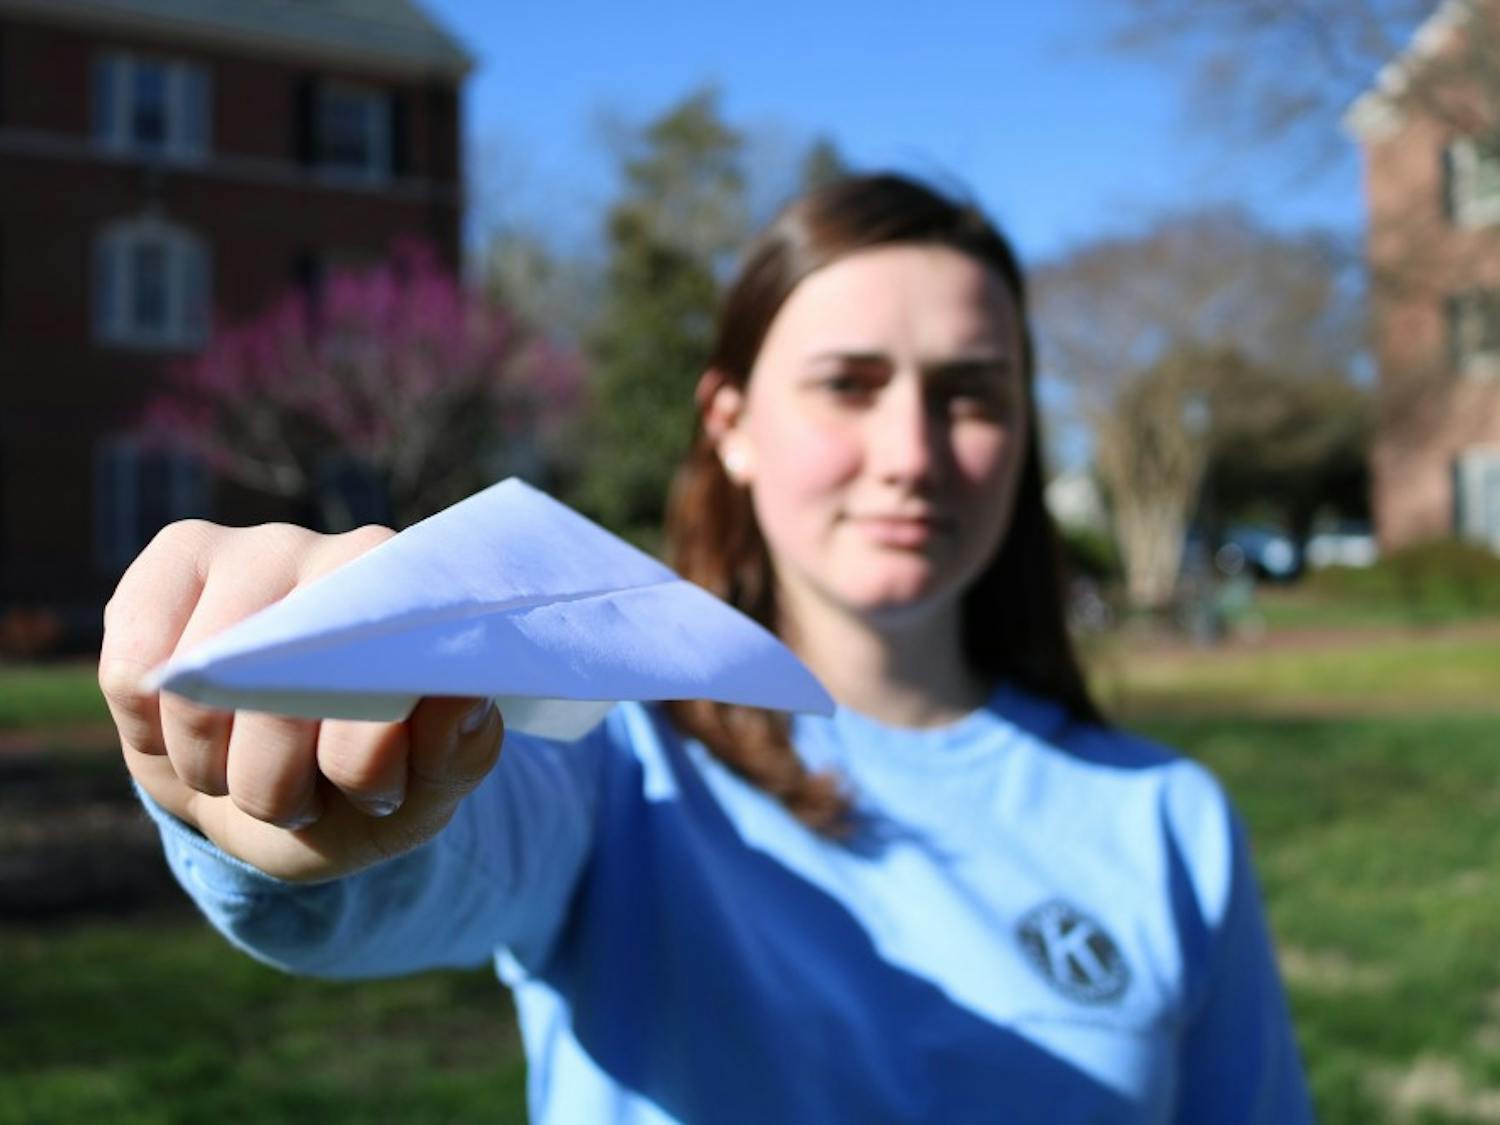 Sophomore Sara Lafontaine holds up a paper airplane on Tuesday, March 26, 2019. The Residence Hall Association is hosting The Big Paper Airplane Tournament on Saturday, March 30, 2019 at 2 PM at the Connor Quad. The event is designed to raise awareness about sustainable practices. Free food and giveaways will be available to those who attend. 